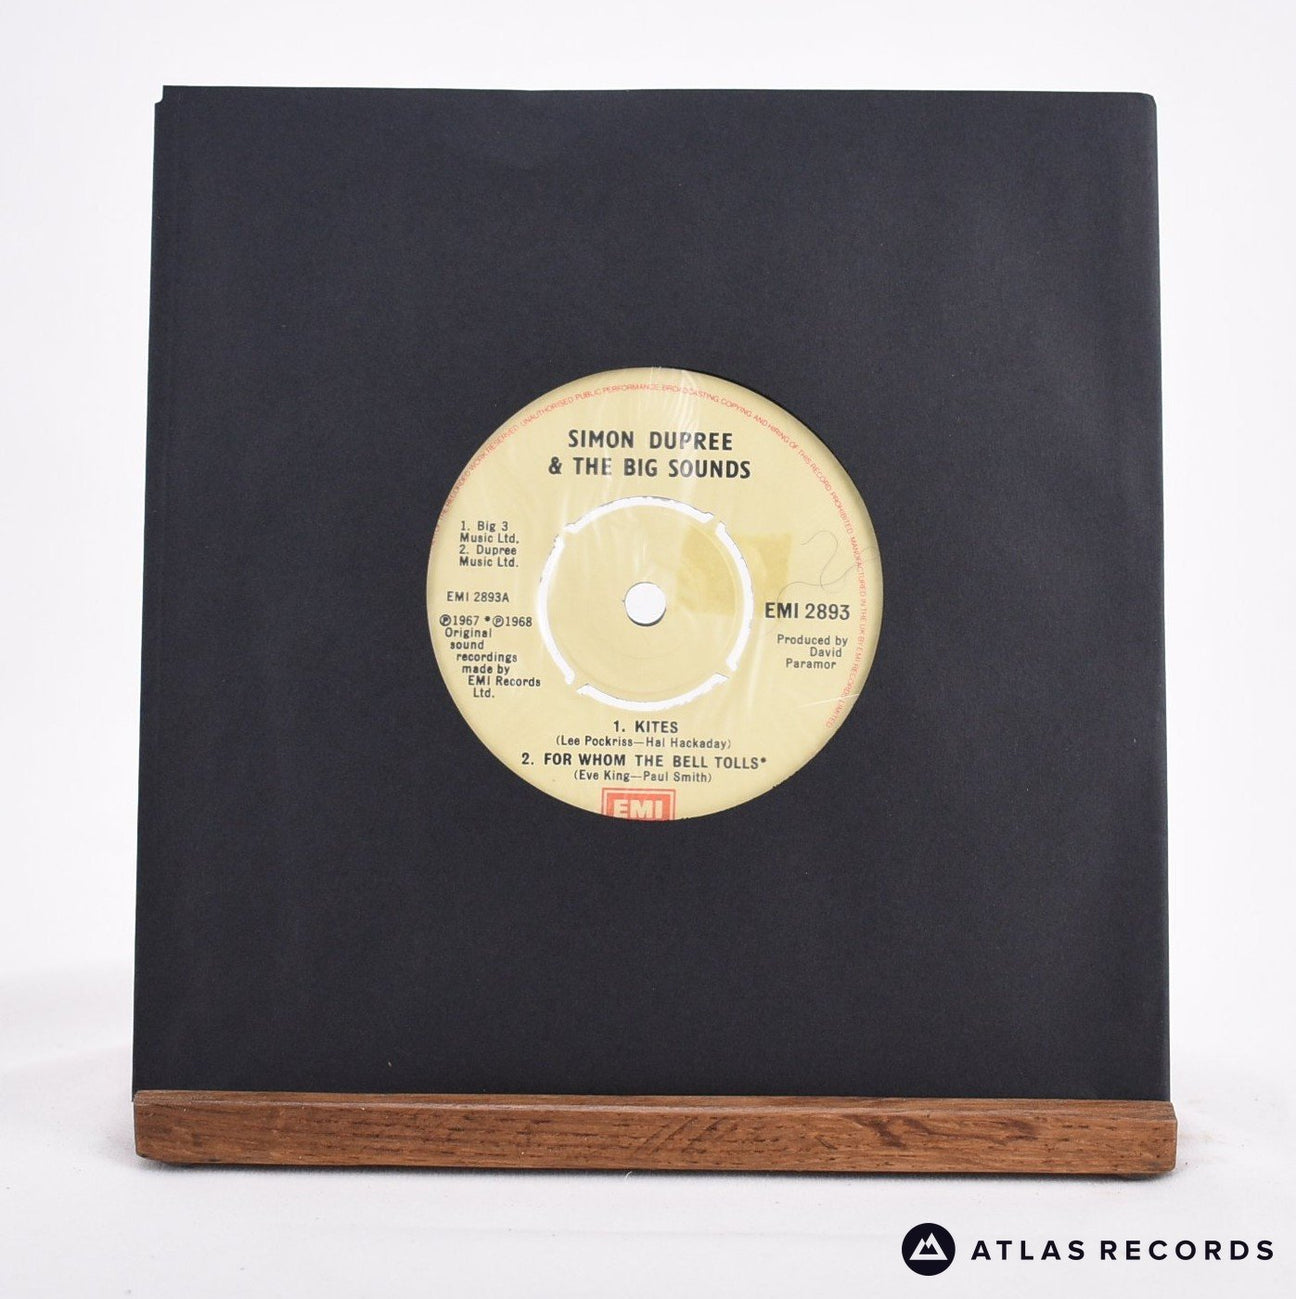 Simon Dupree And The Big Sound Simon Dupree & The Big Sounds 7" Vinyl Record - In Sleeve